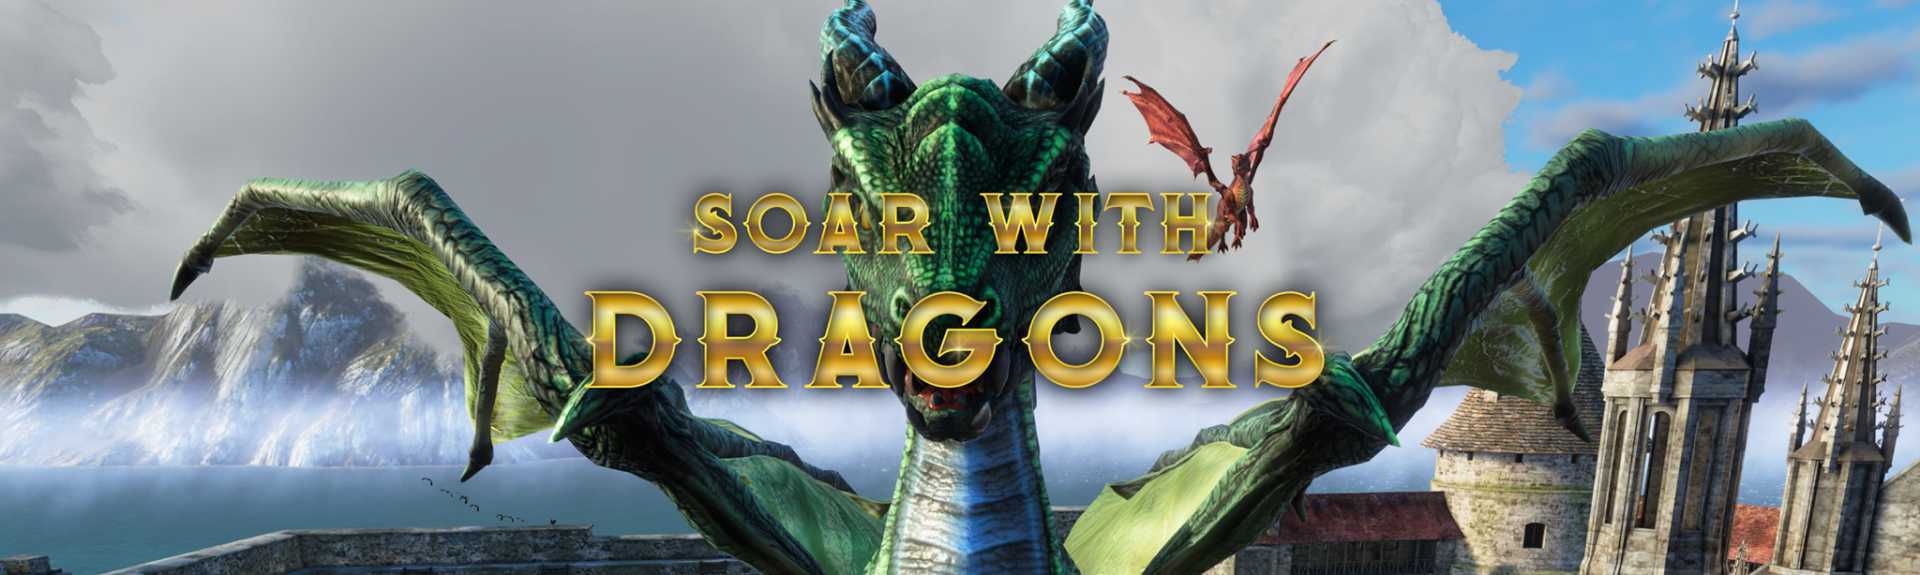 Soar with Dragons